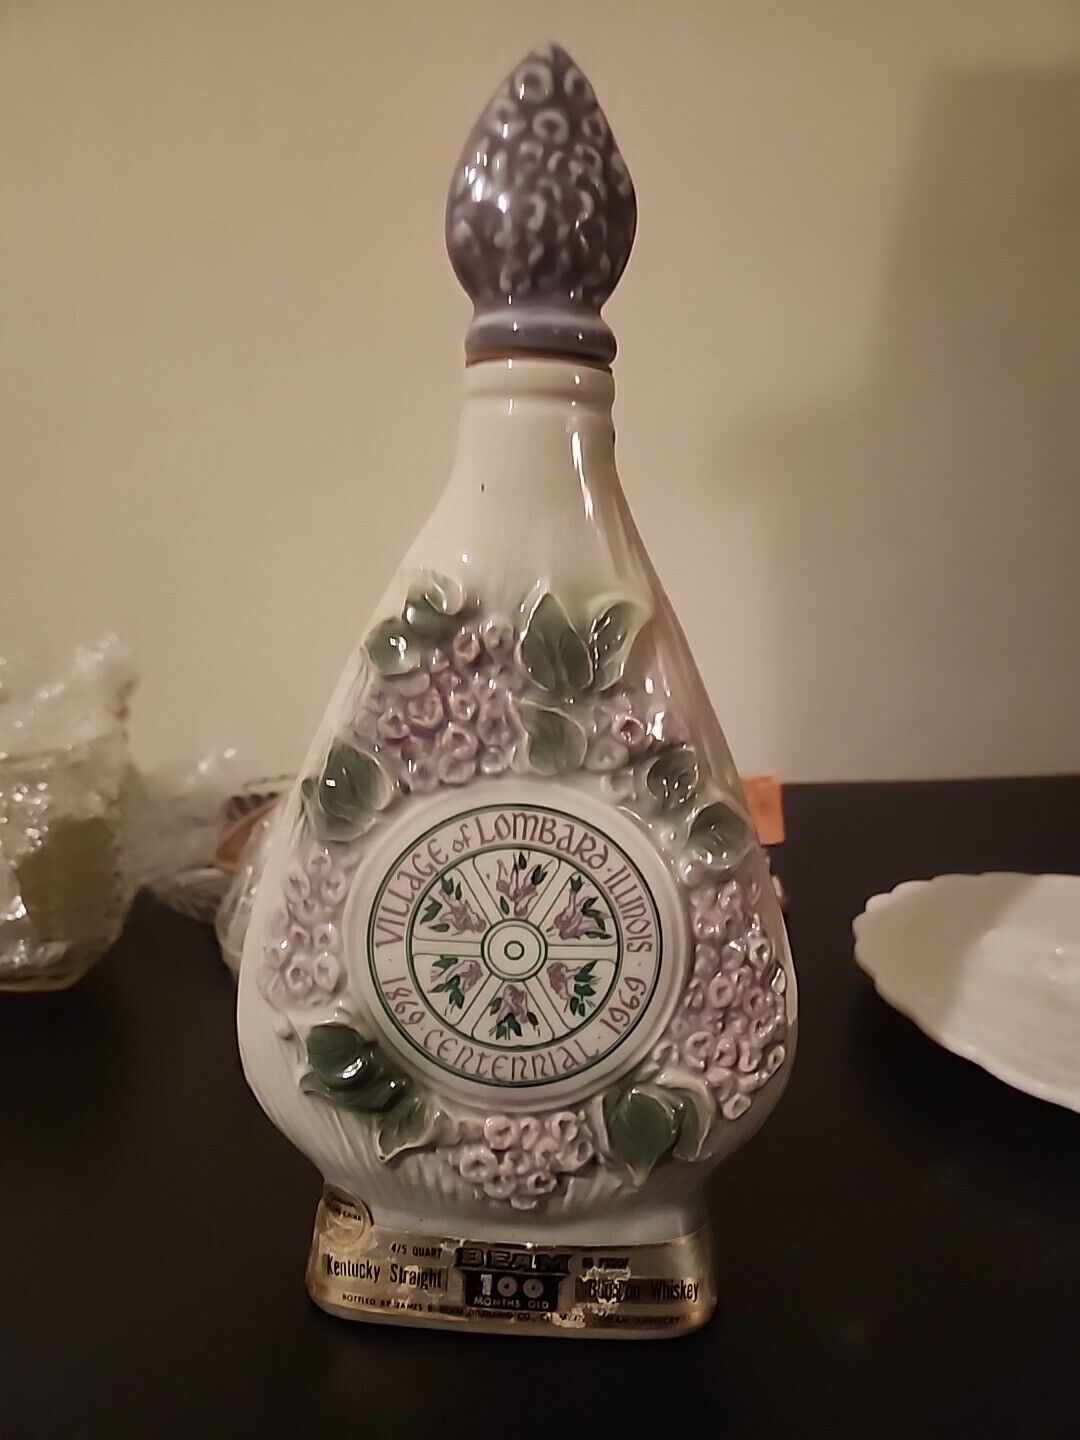 Vintage 1969 Jim Beam Village of Lombard, IL Centennial Lilac Decanter (Empty)